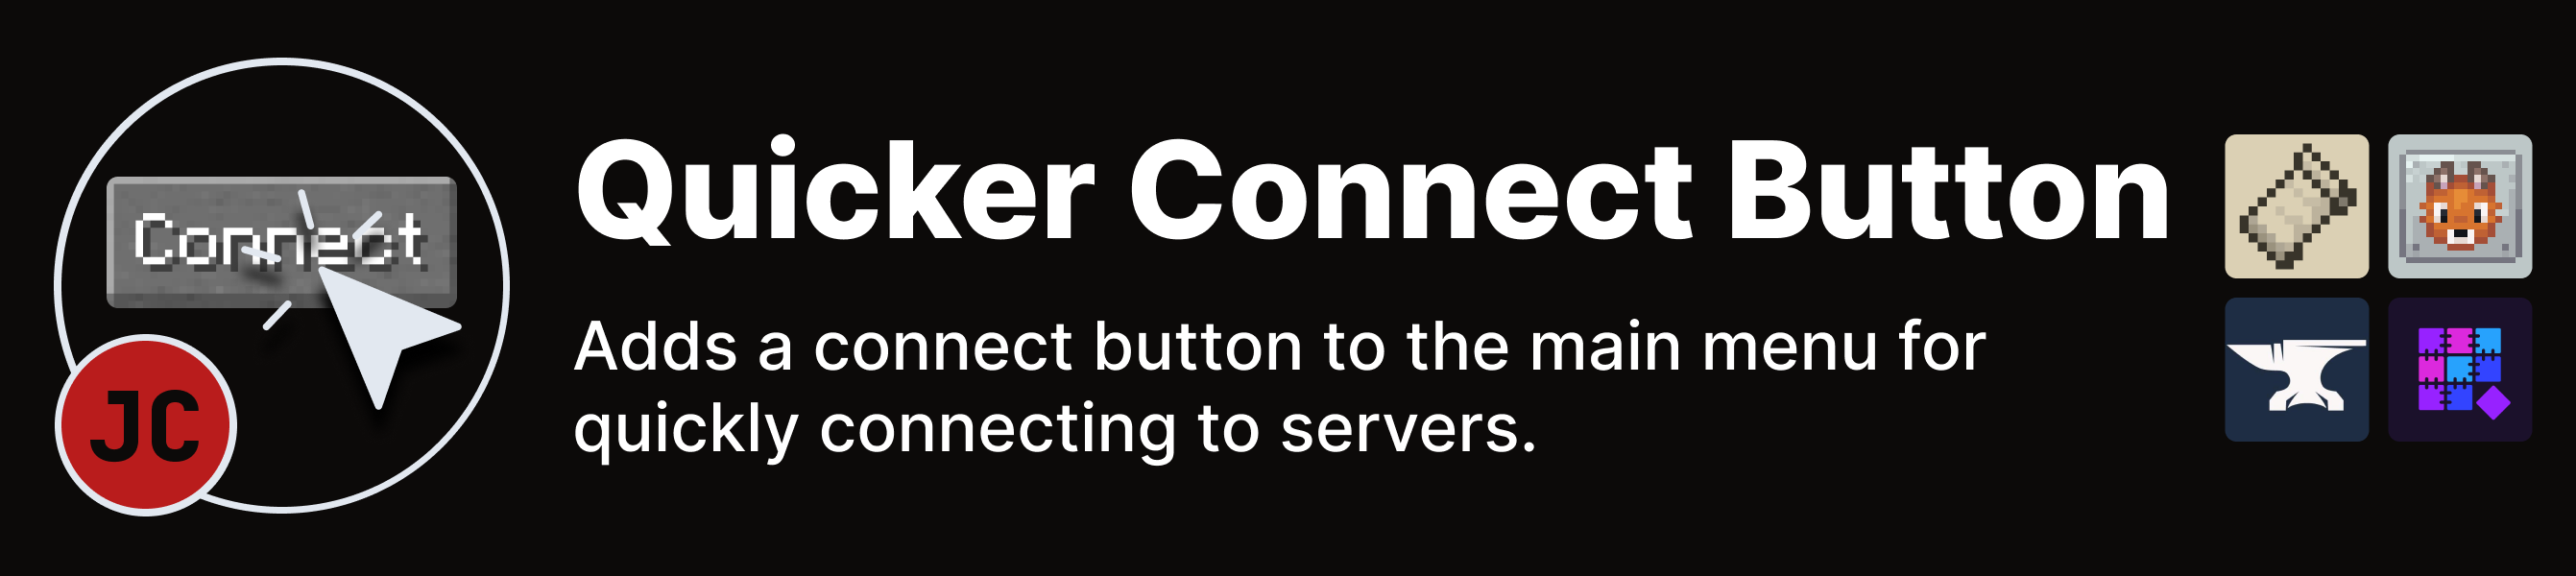 Quicker Connect Button: Adds a connect button to the main menu for quickly connecting to servers.